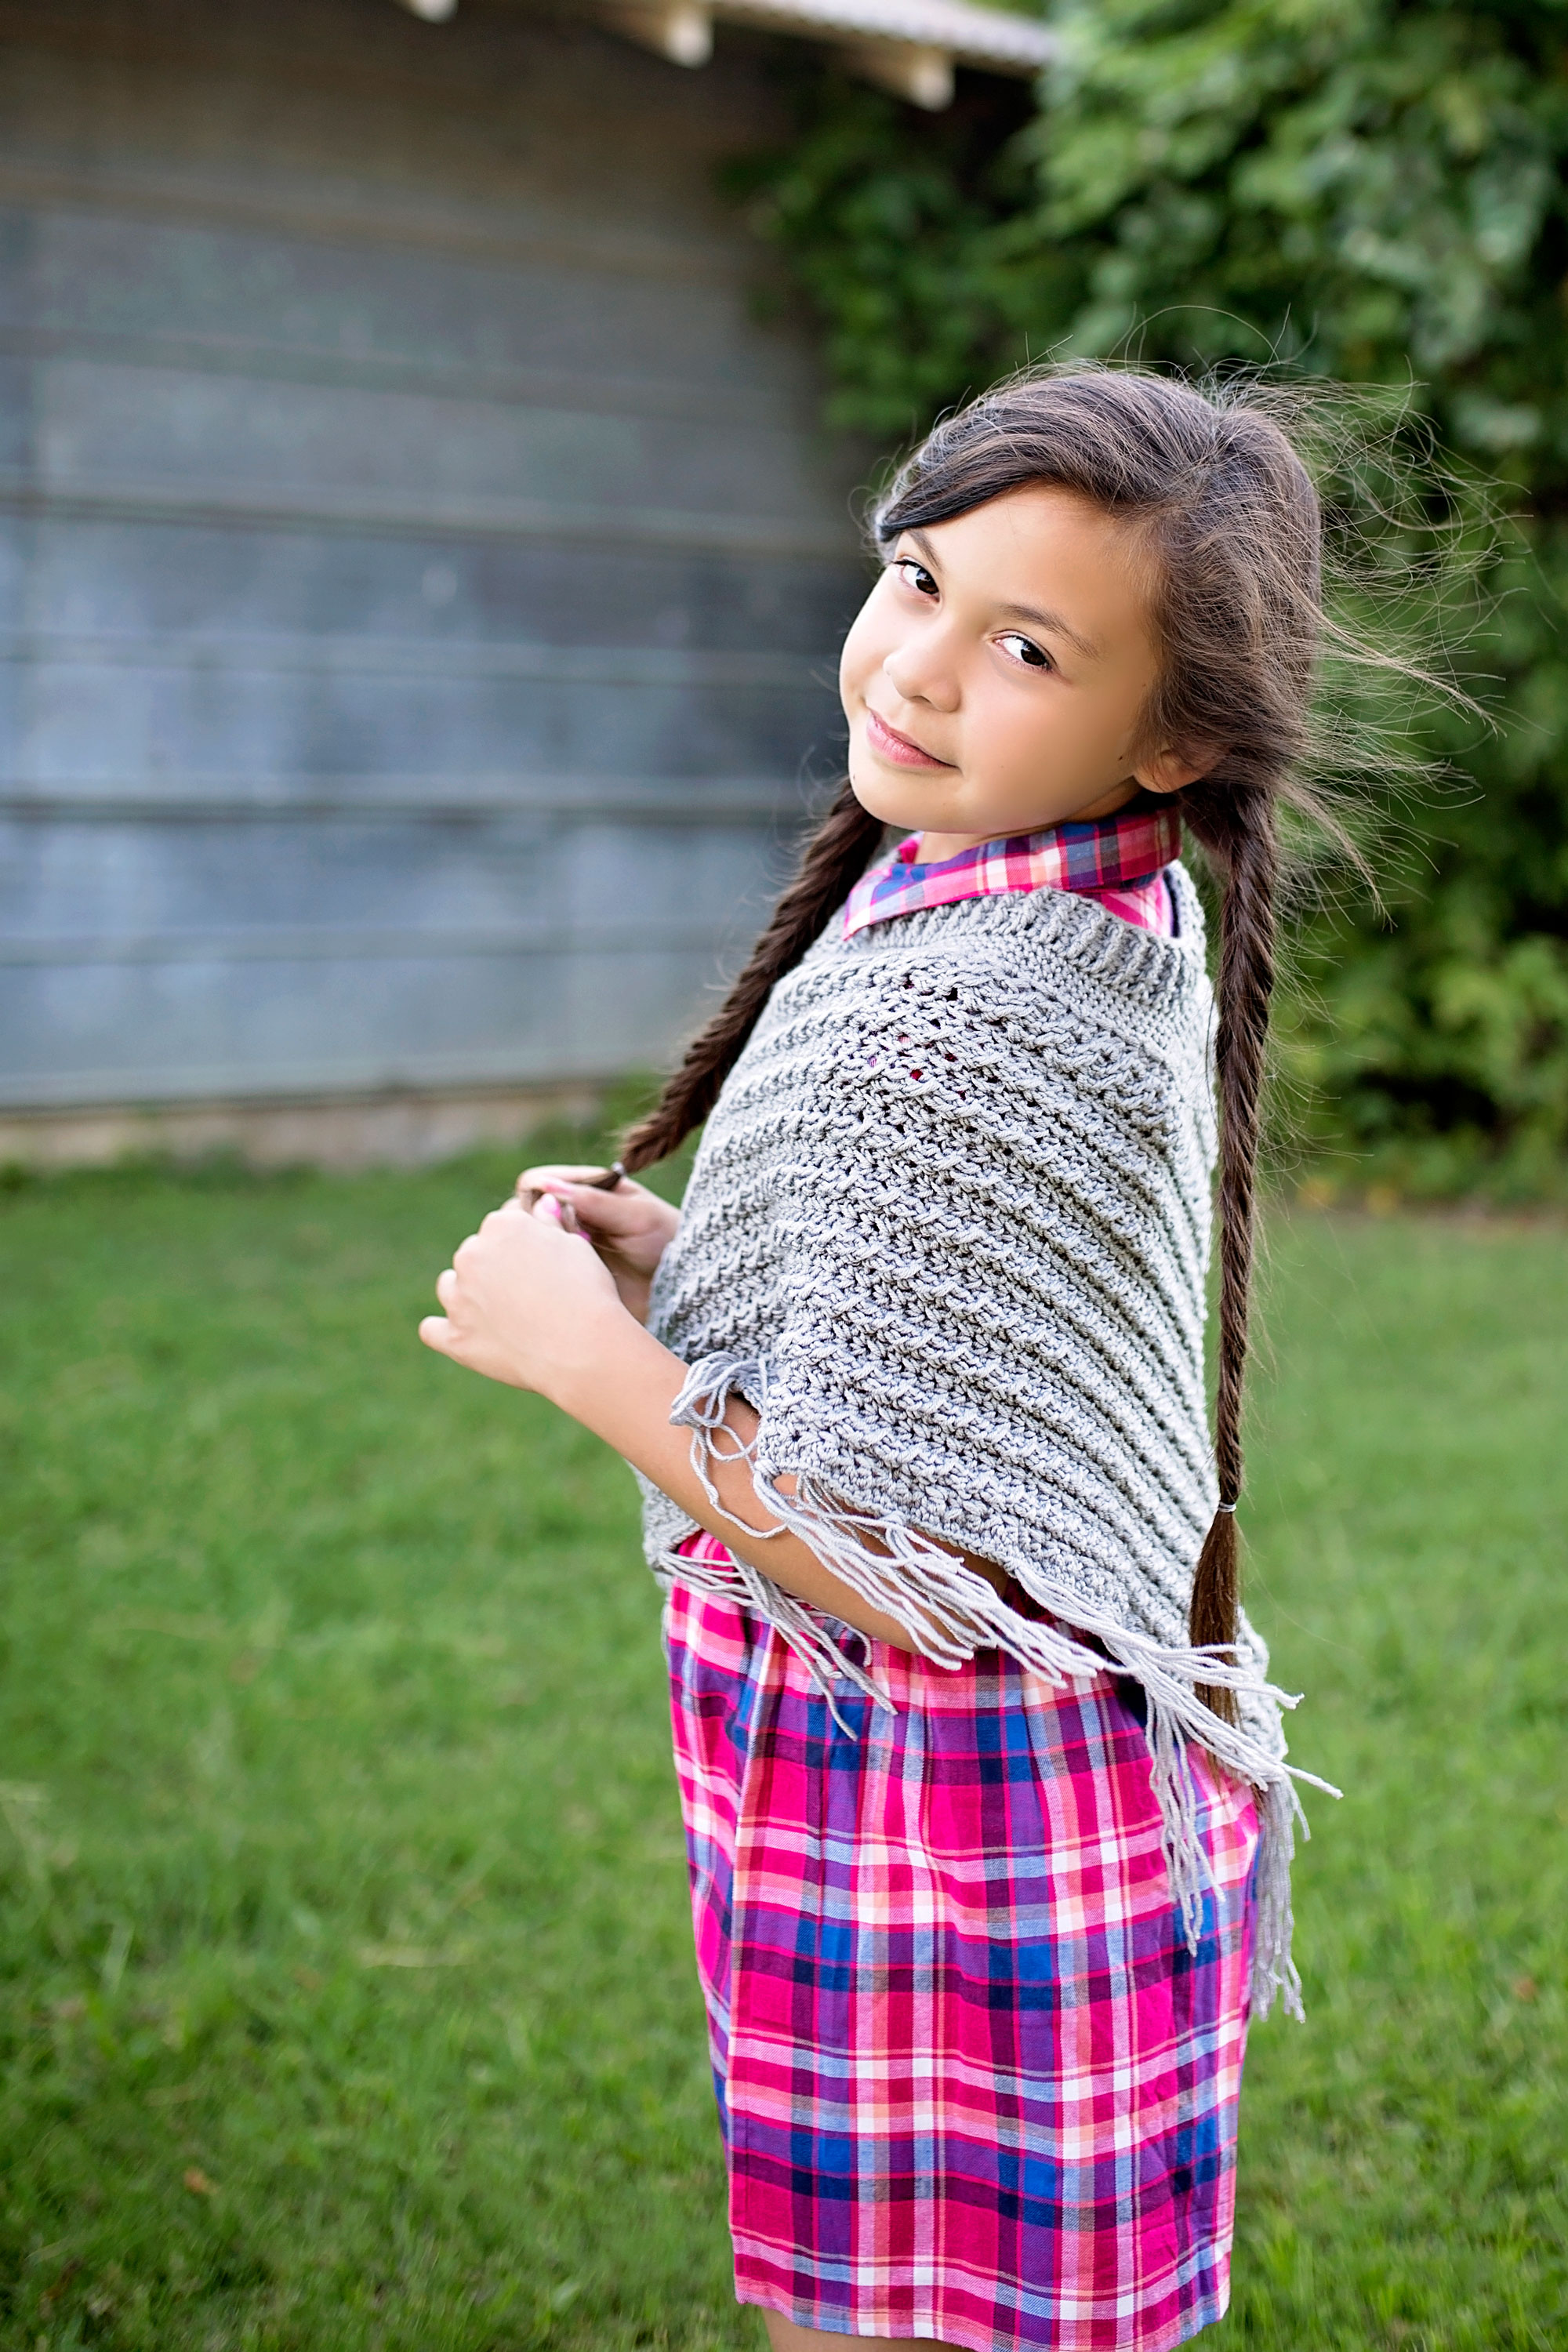 Cabled Poncho